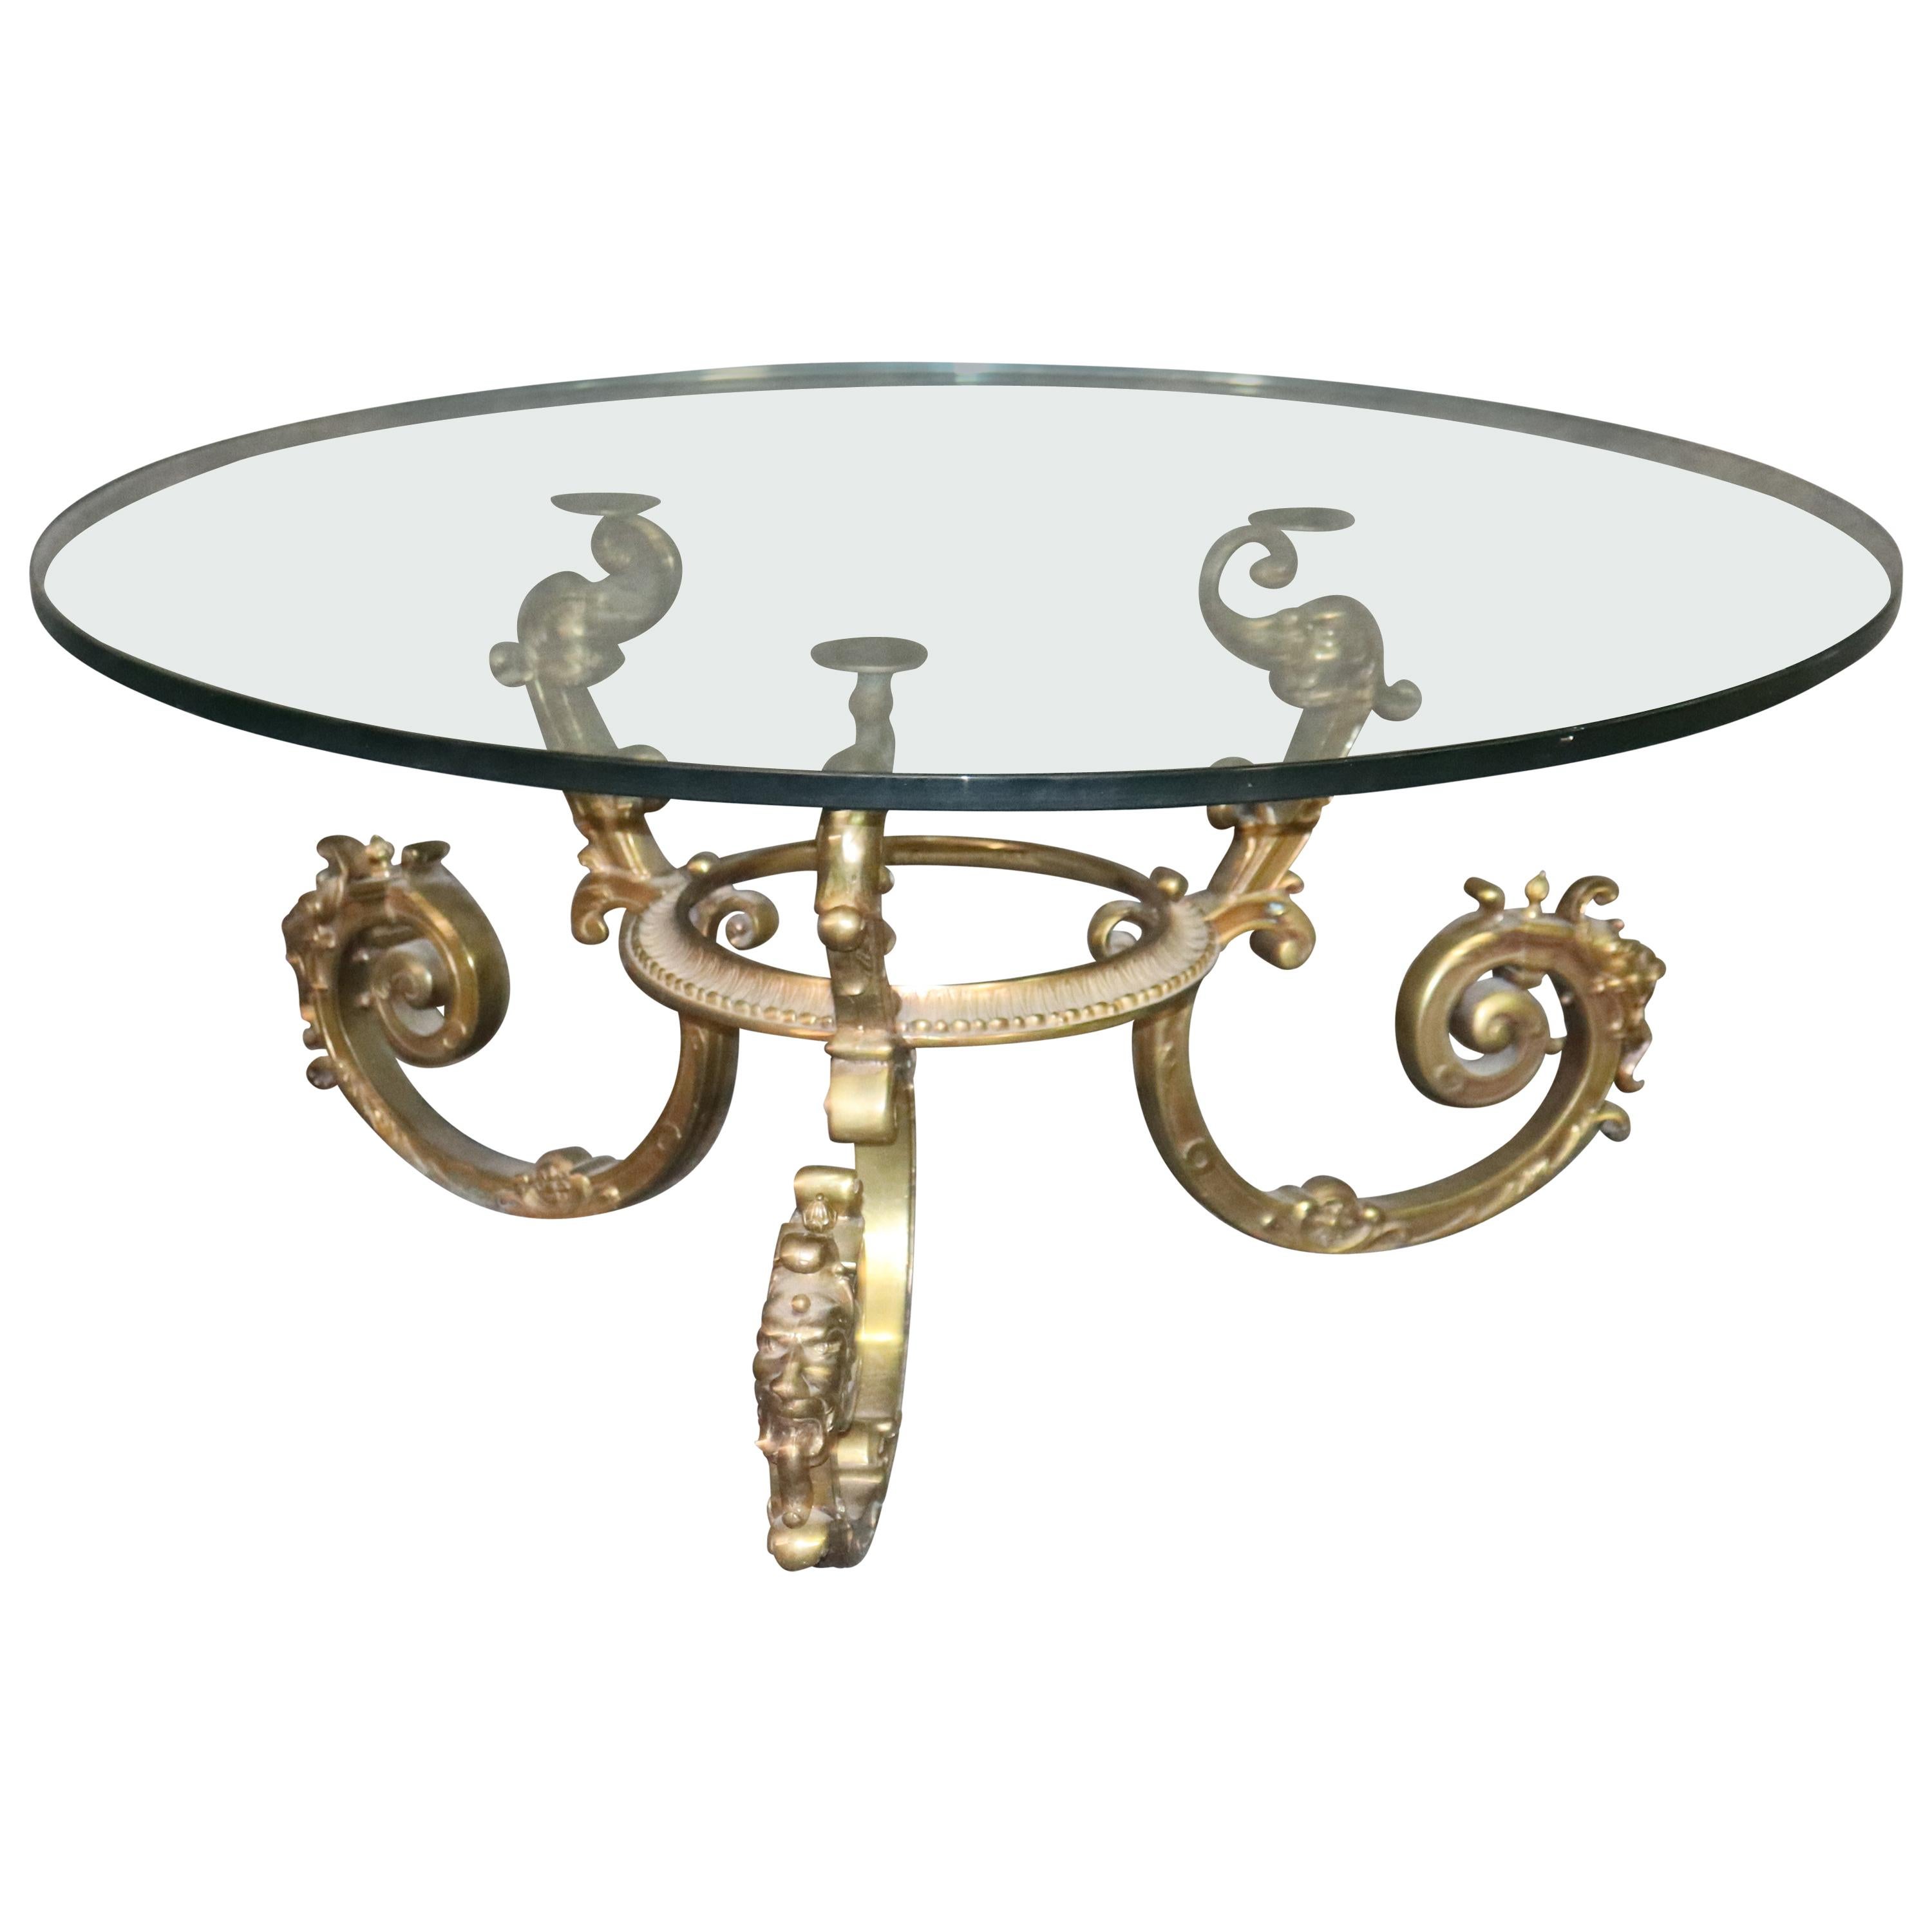 Round Italian Made Hollywood Regency Solid Brass and Glass Coffee Cocktail Table